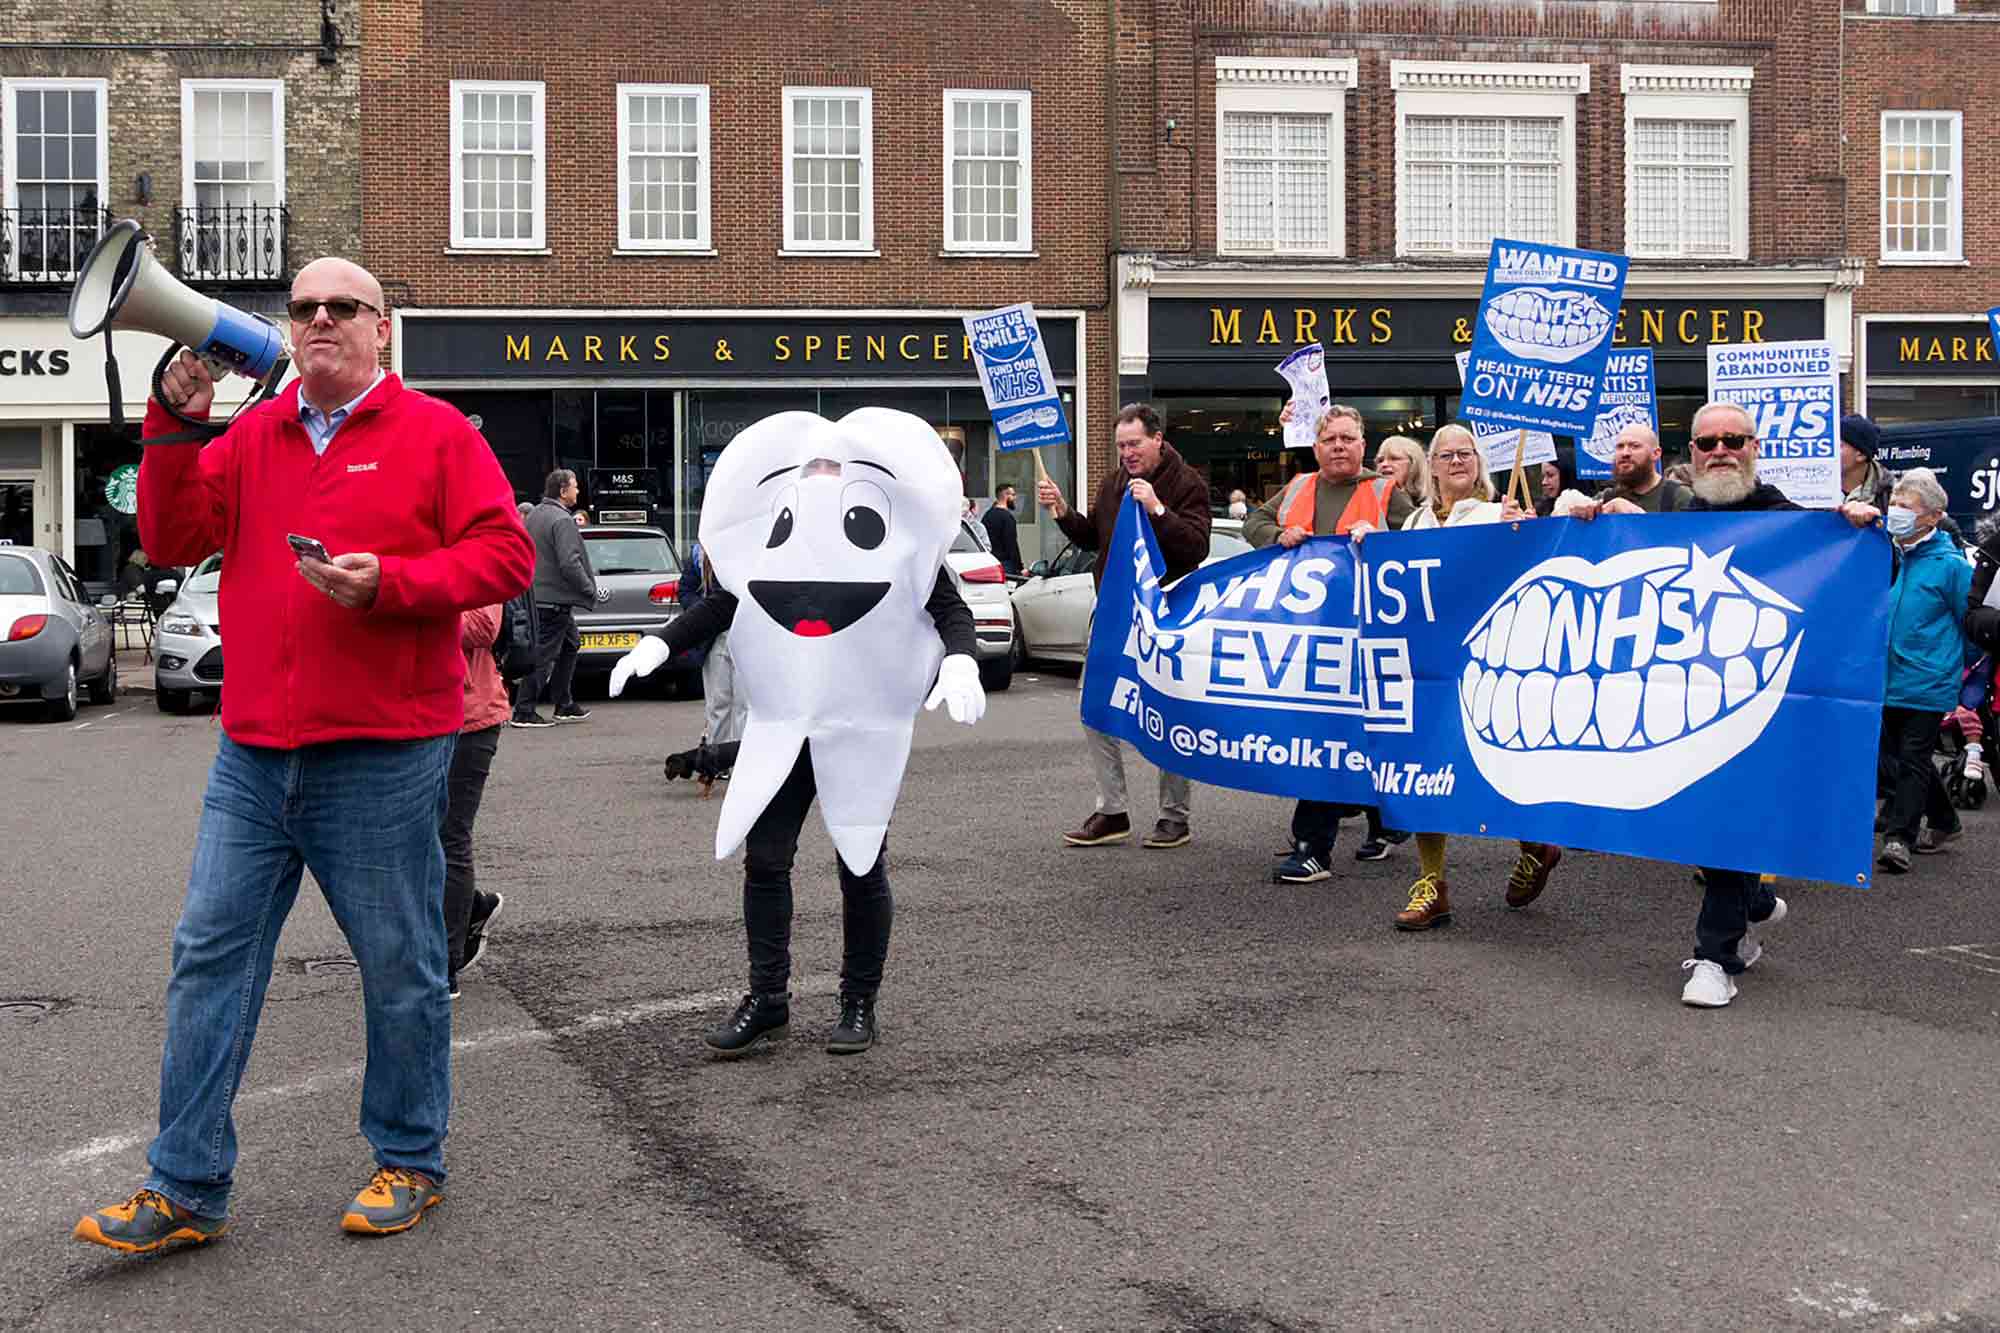 'A national disgrace' – dental charity to offer treatment in face of NHS access troubles